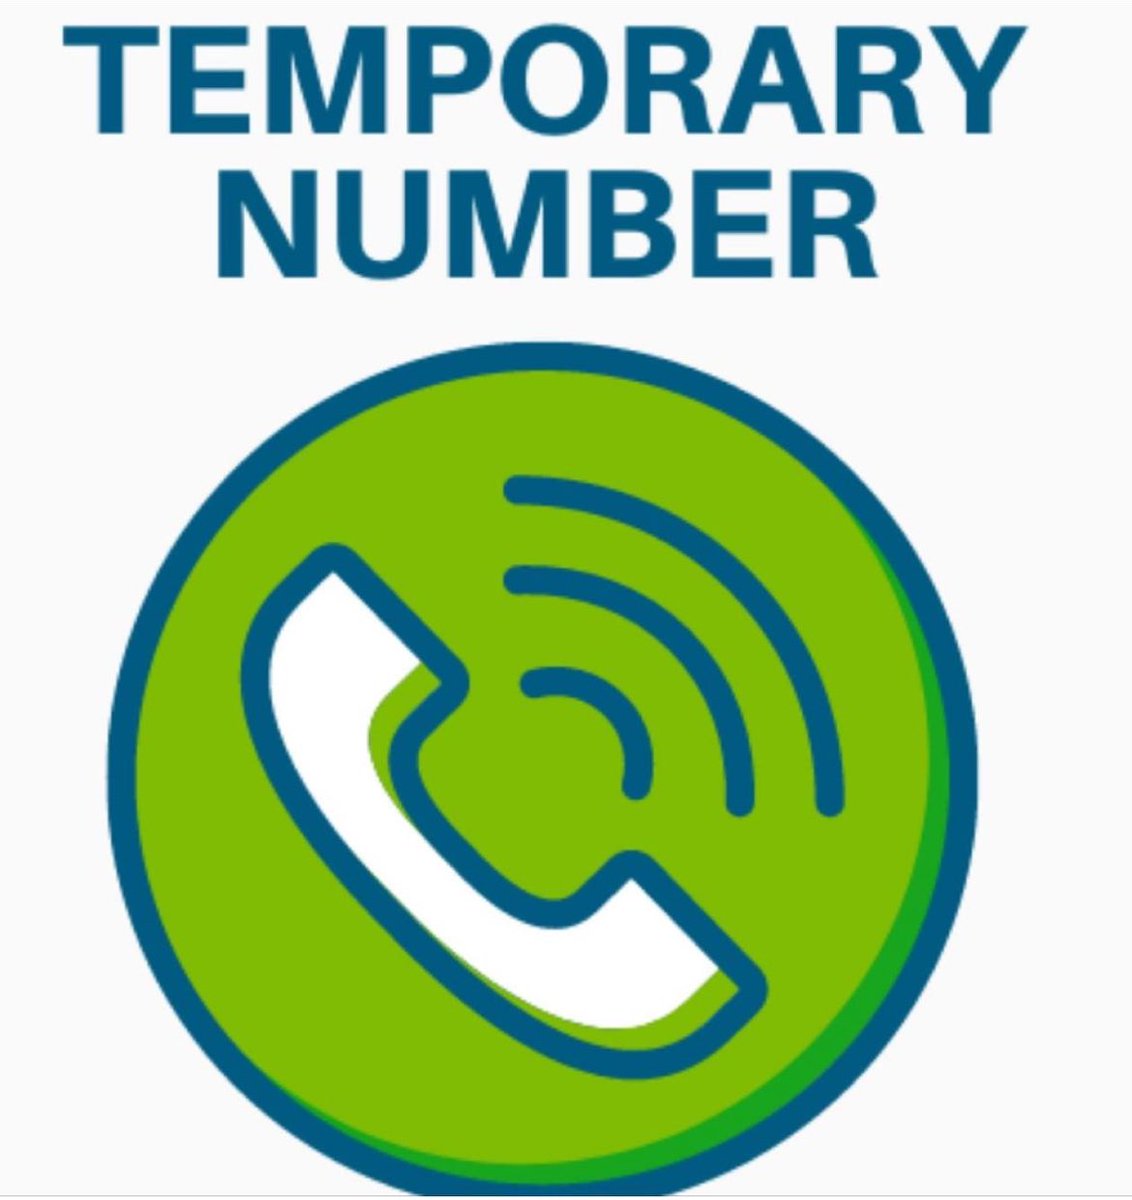 Currently changing our phone system until further notice please use this number 01709 280443